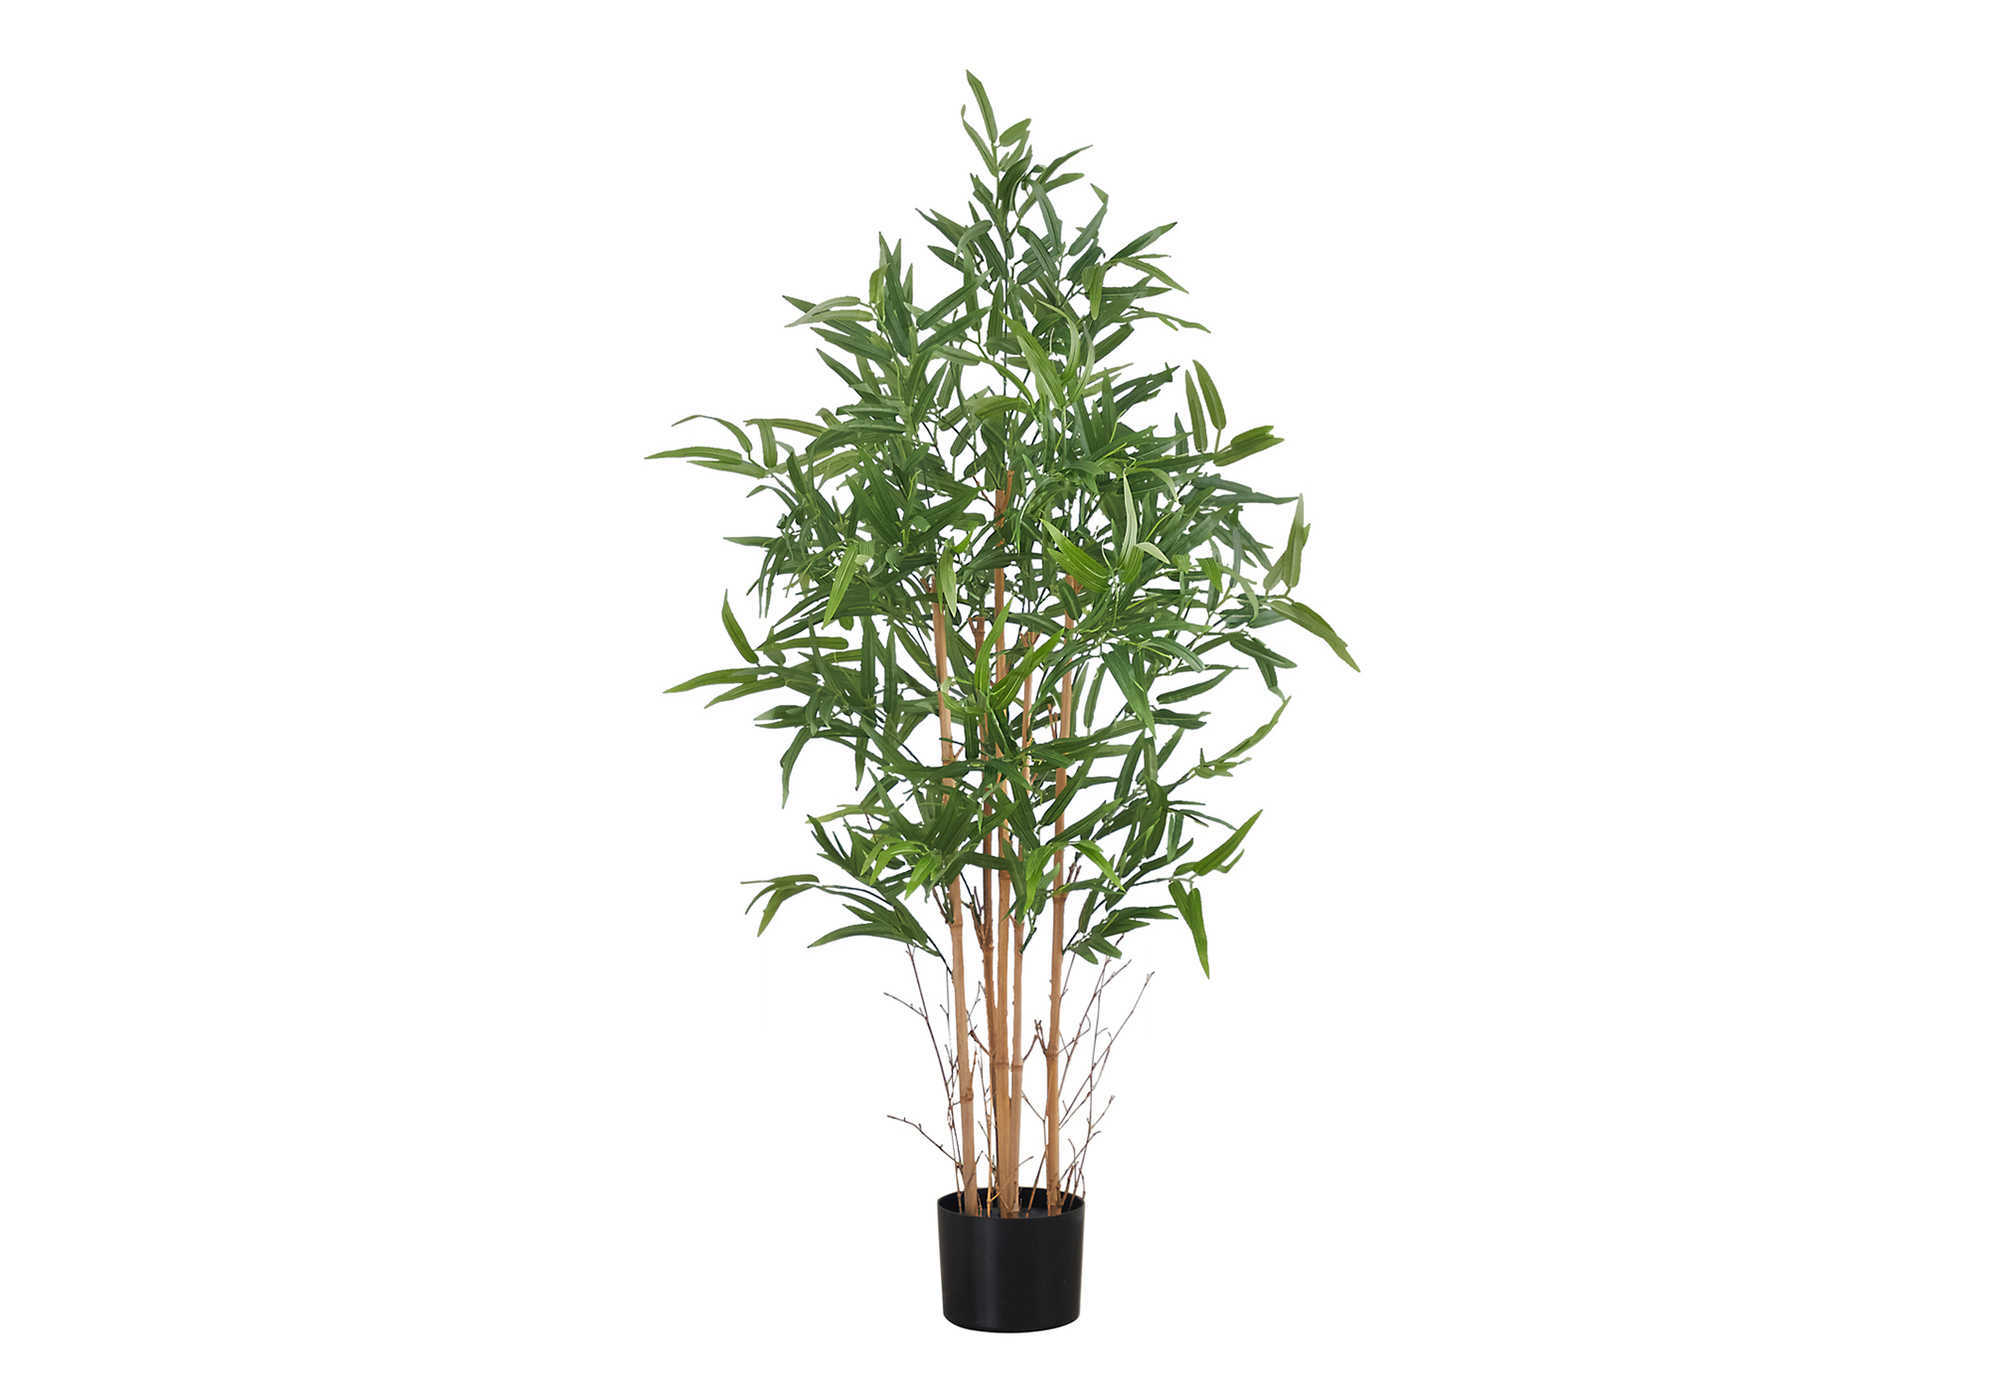 ARTIFICIAL PLANT - 50"H / INDOOR BAMBOO TREE IN A 5" POT